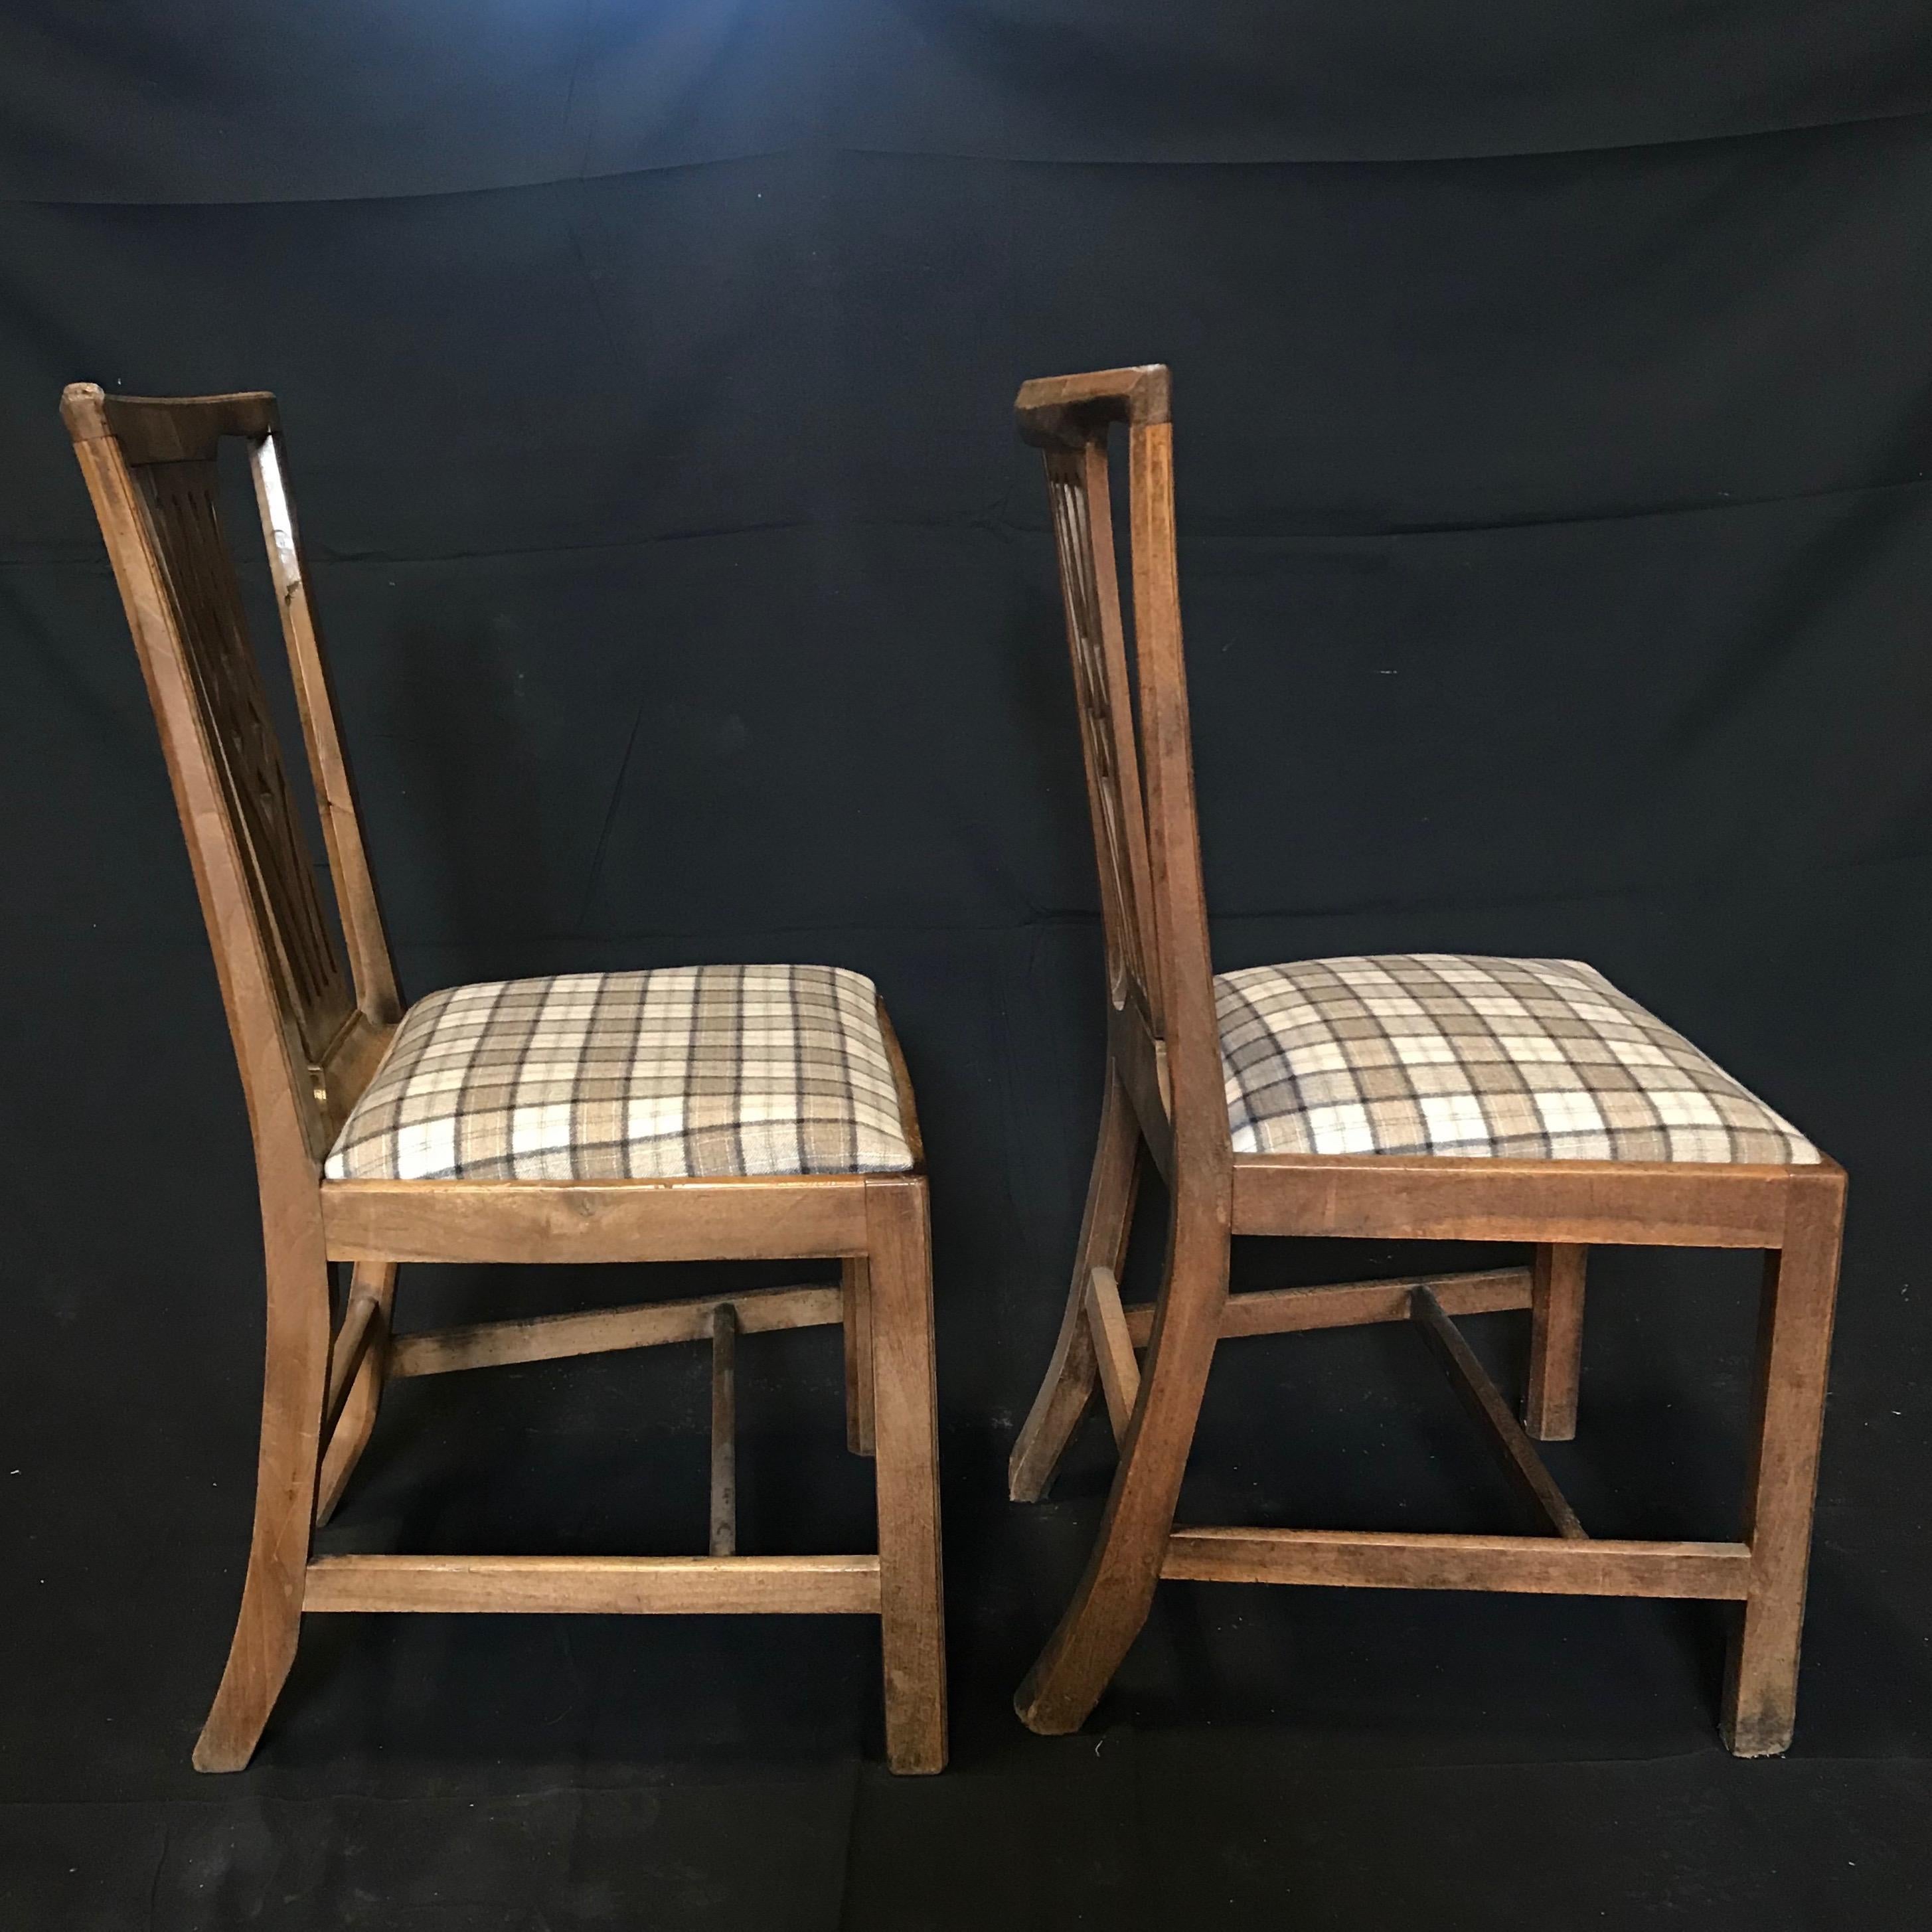 Gorgeous Early British Chairs Newly Reupholstered in Neutral British Tartan For Sale 2